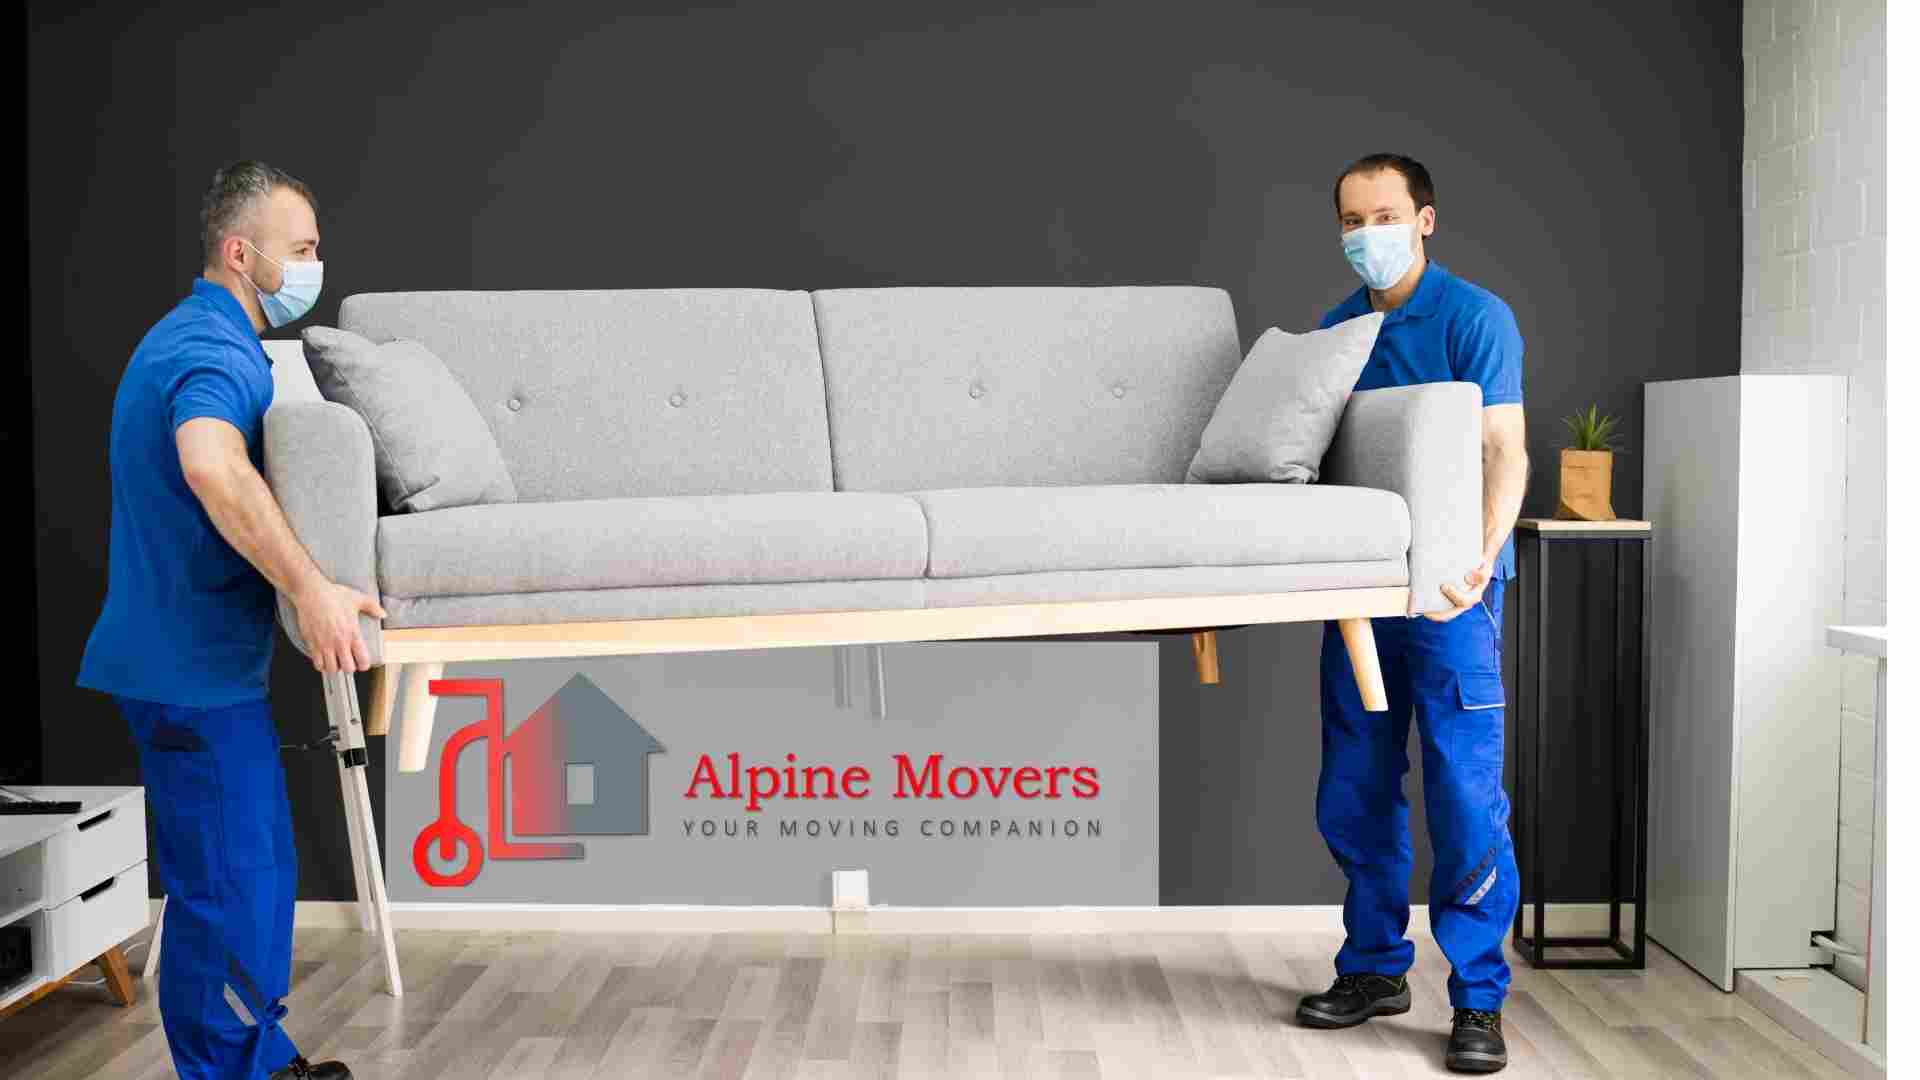 Best Movers and Packers in Dubai - Furniture Moving Services at Door Step. Alpine Movers